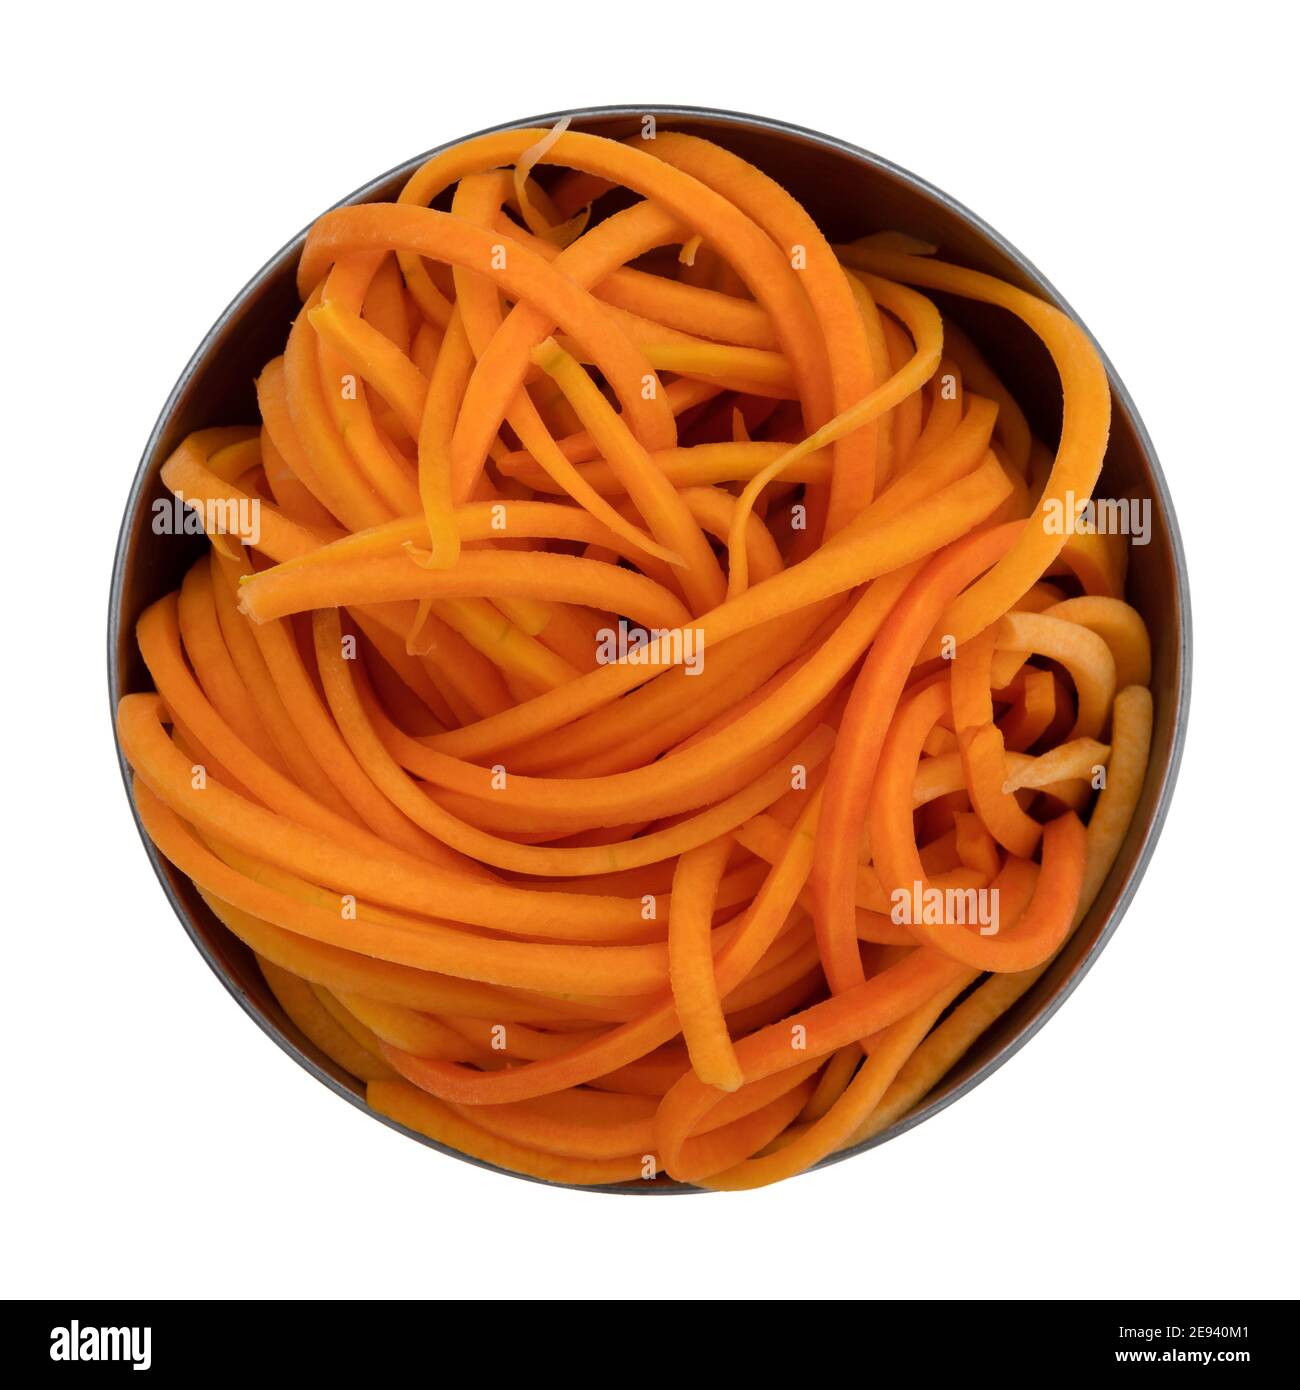 Top view of a metal bowl containing a portion of butternut squash noodles isolated on a white background. Stock Photo